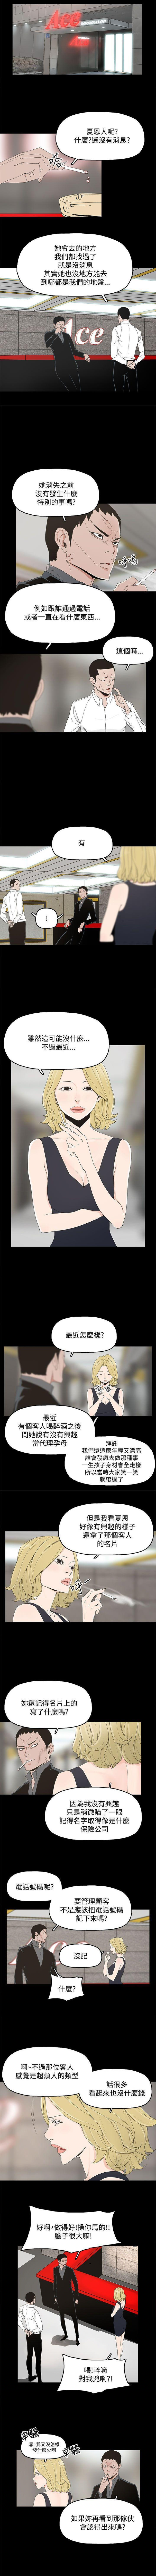 Francaise 代理孕母 7 [Chinese] Manhwa Freckles - Page 6